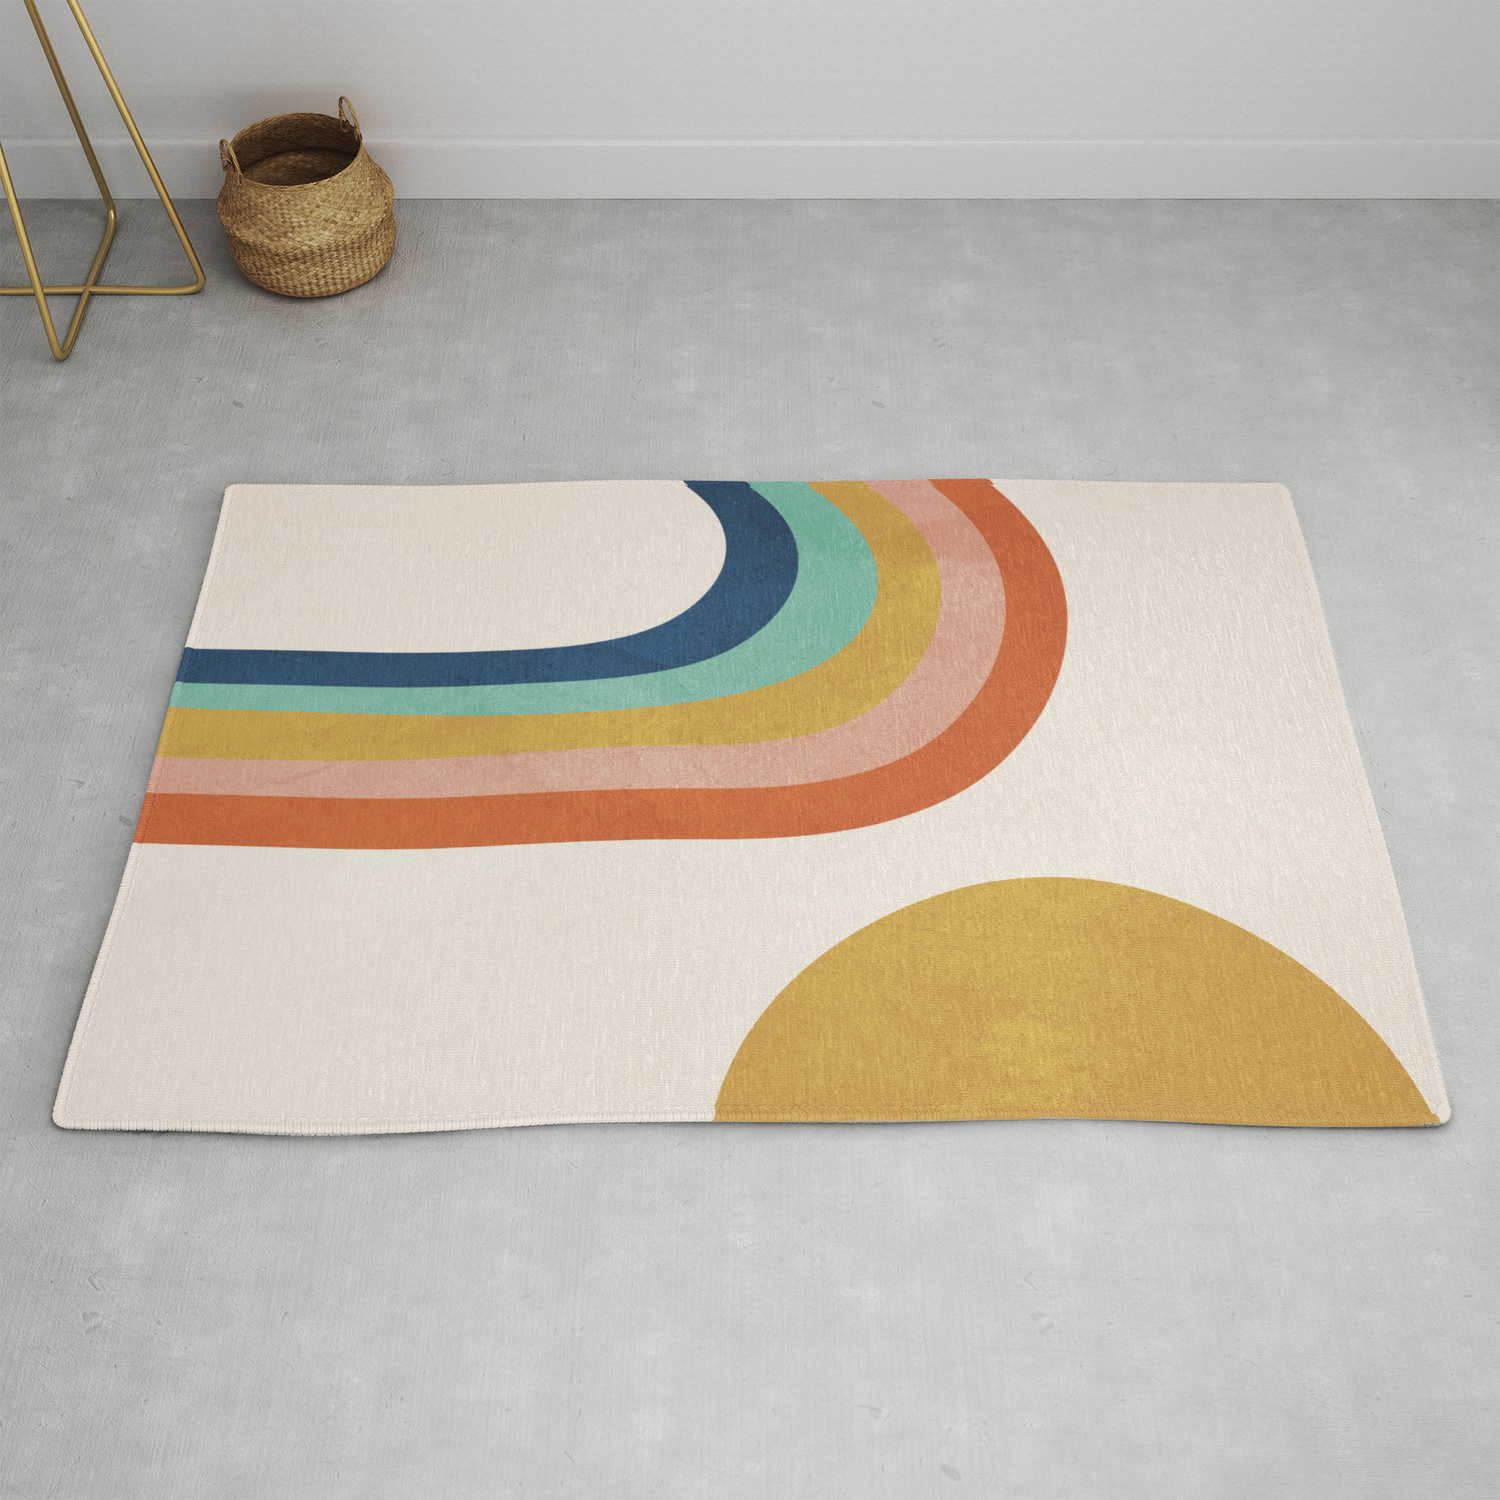 The Sun And A Rainbow Rug By City Art, Society6 Rug Review